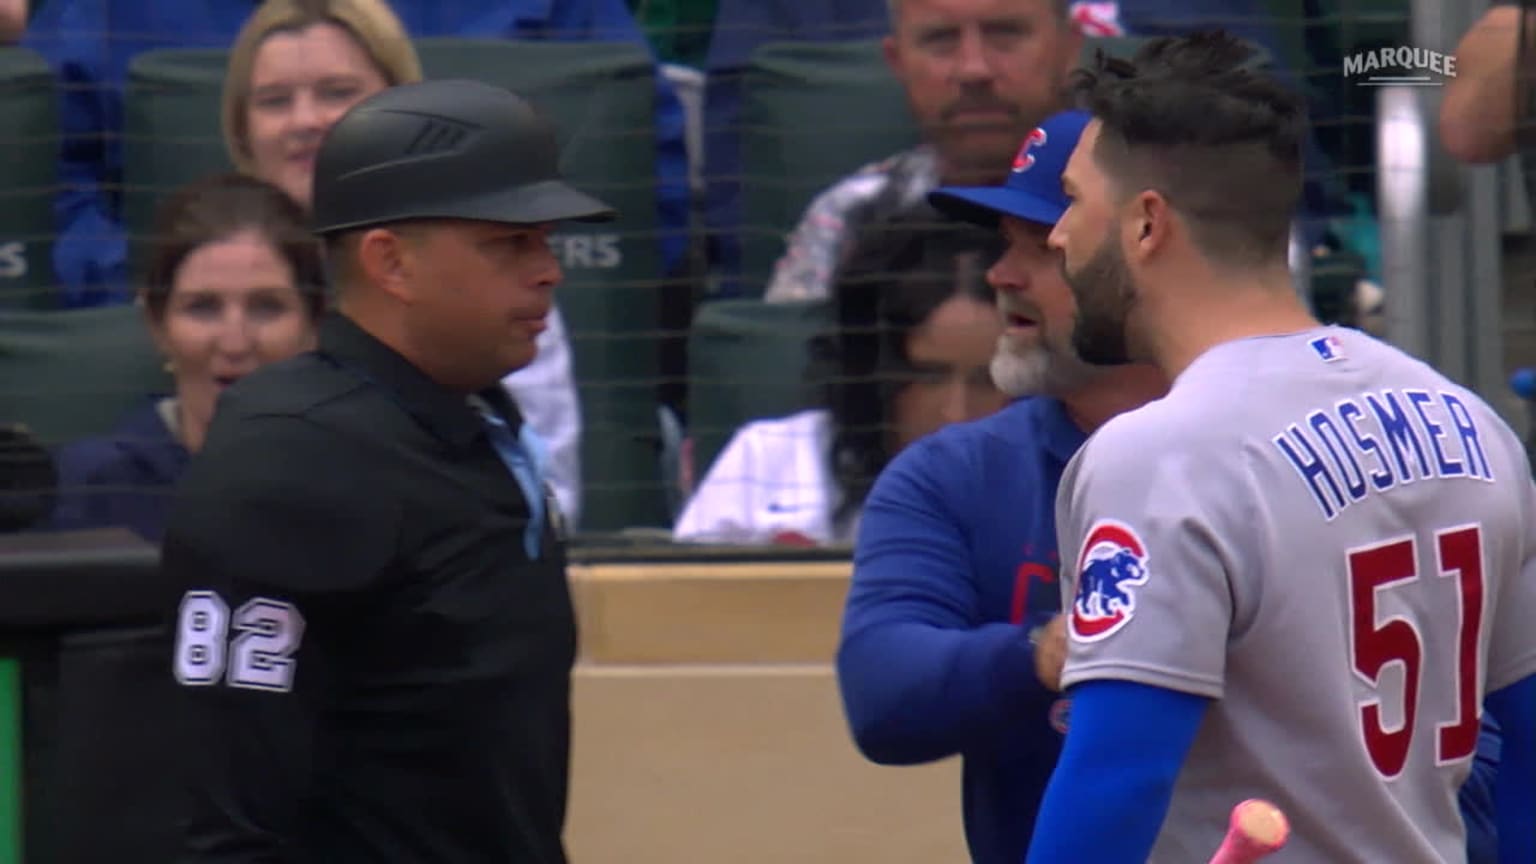 The Chicago Cubs listen to fans and say goodbye to Eric Hosmer